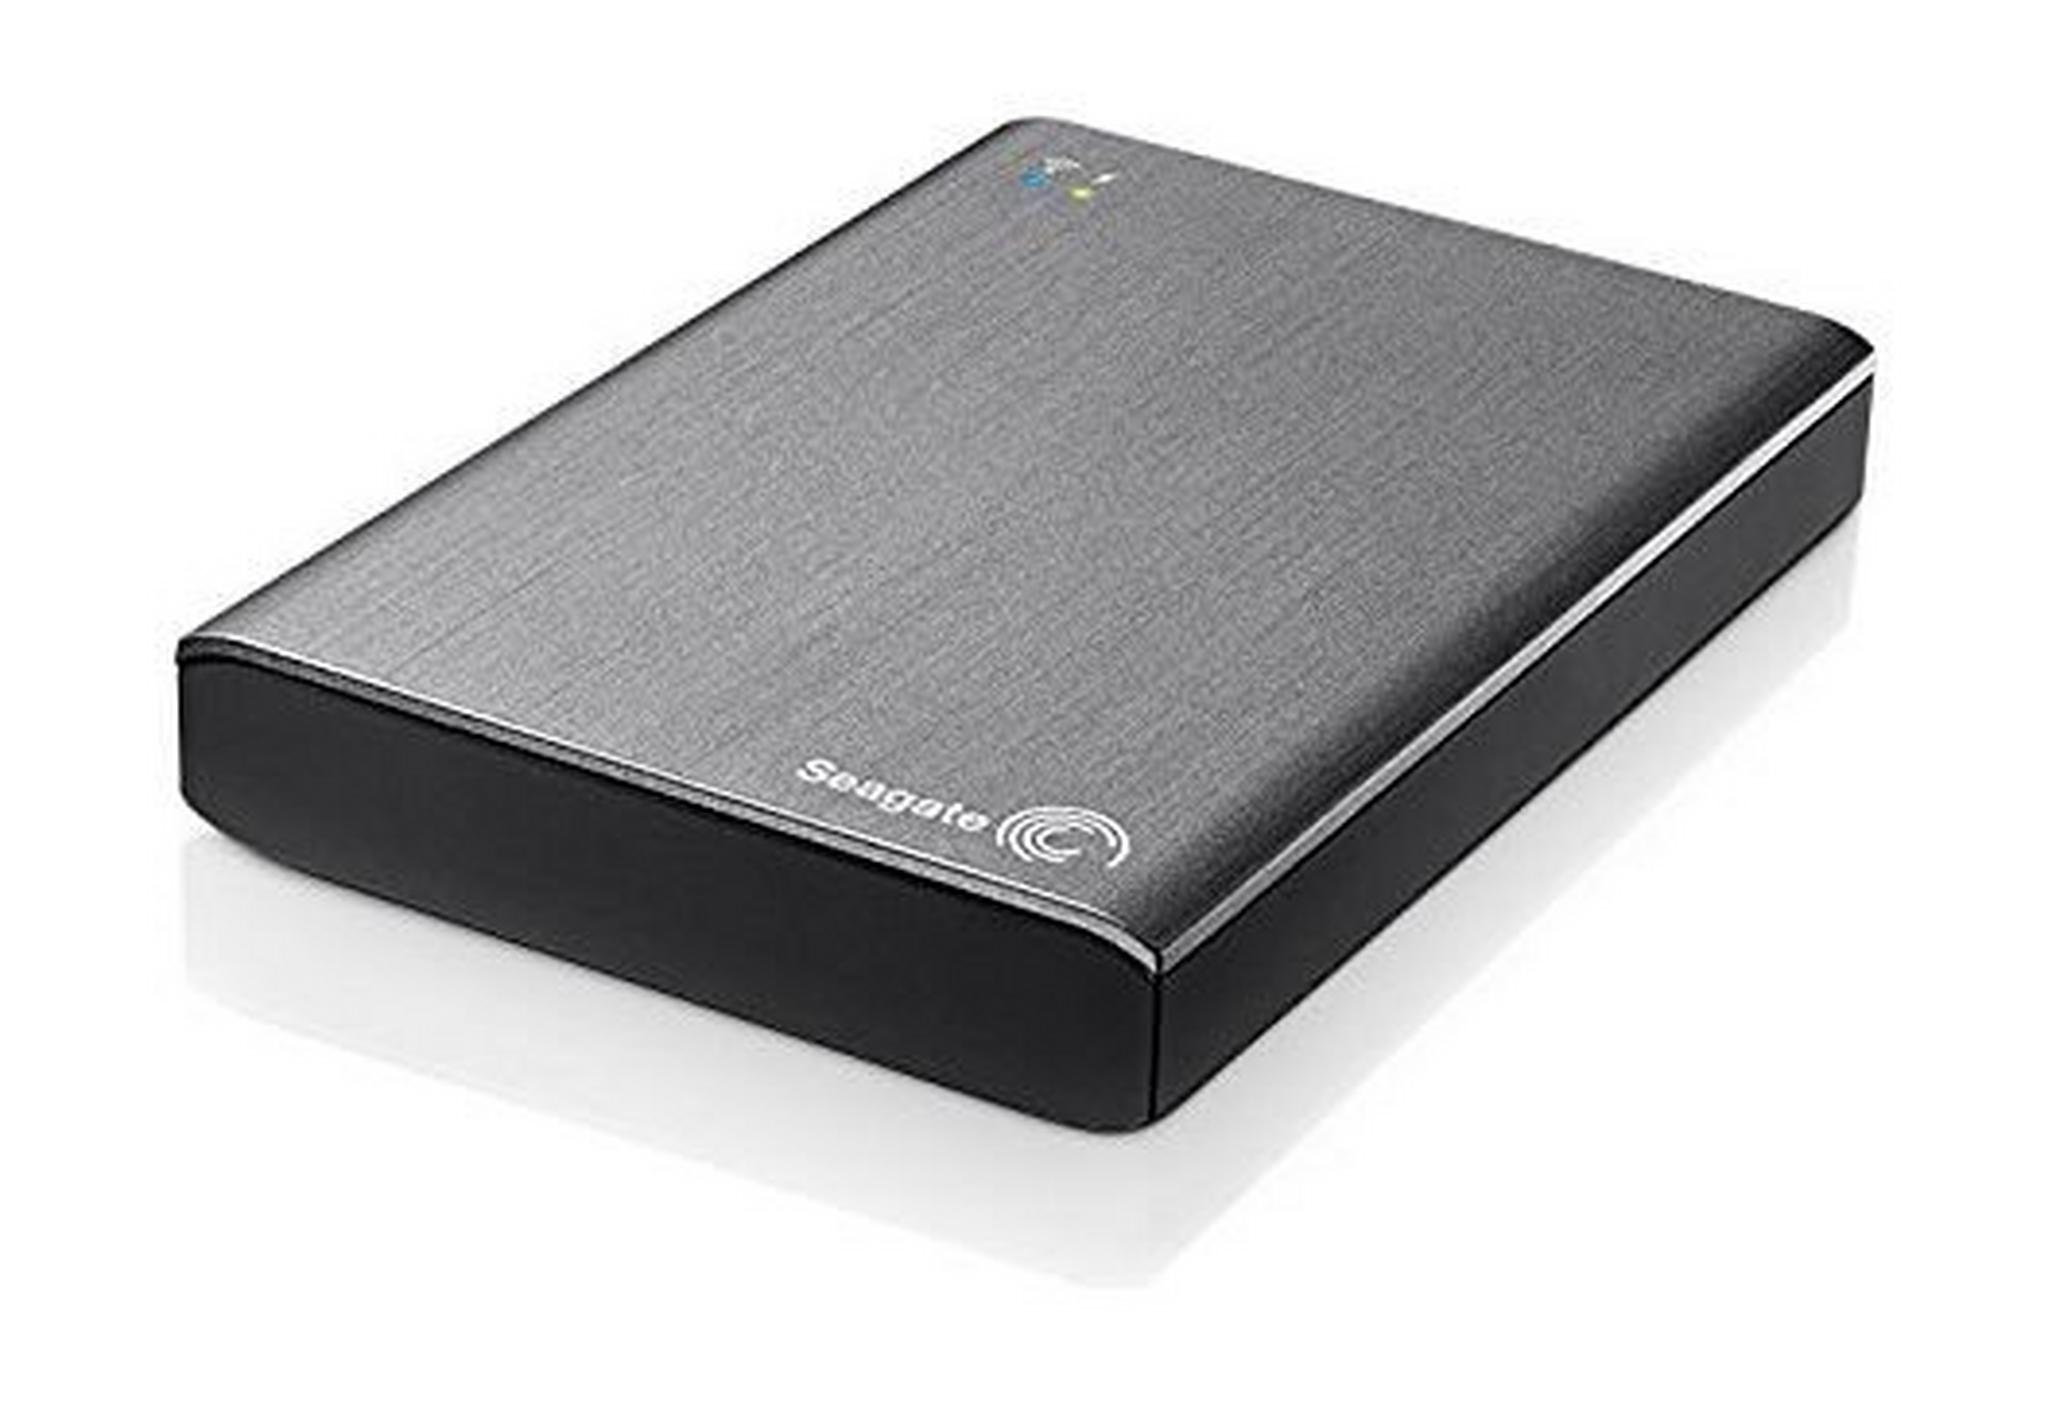 Seagate 2TB Wireless Plus Portable Hard Disk with Built-in Wi-Fi - STCV2000200